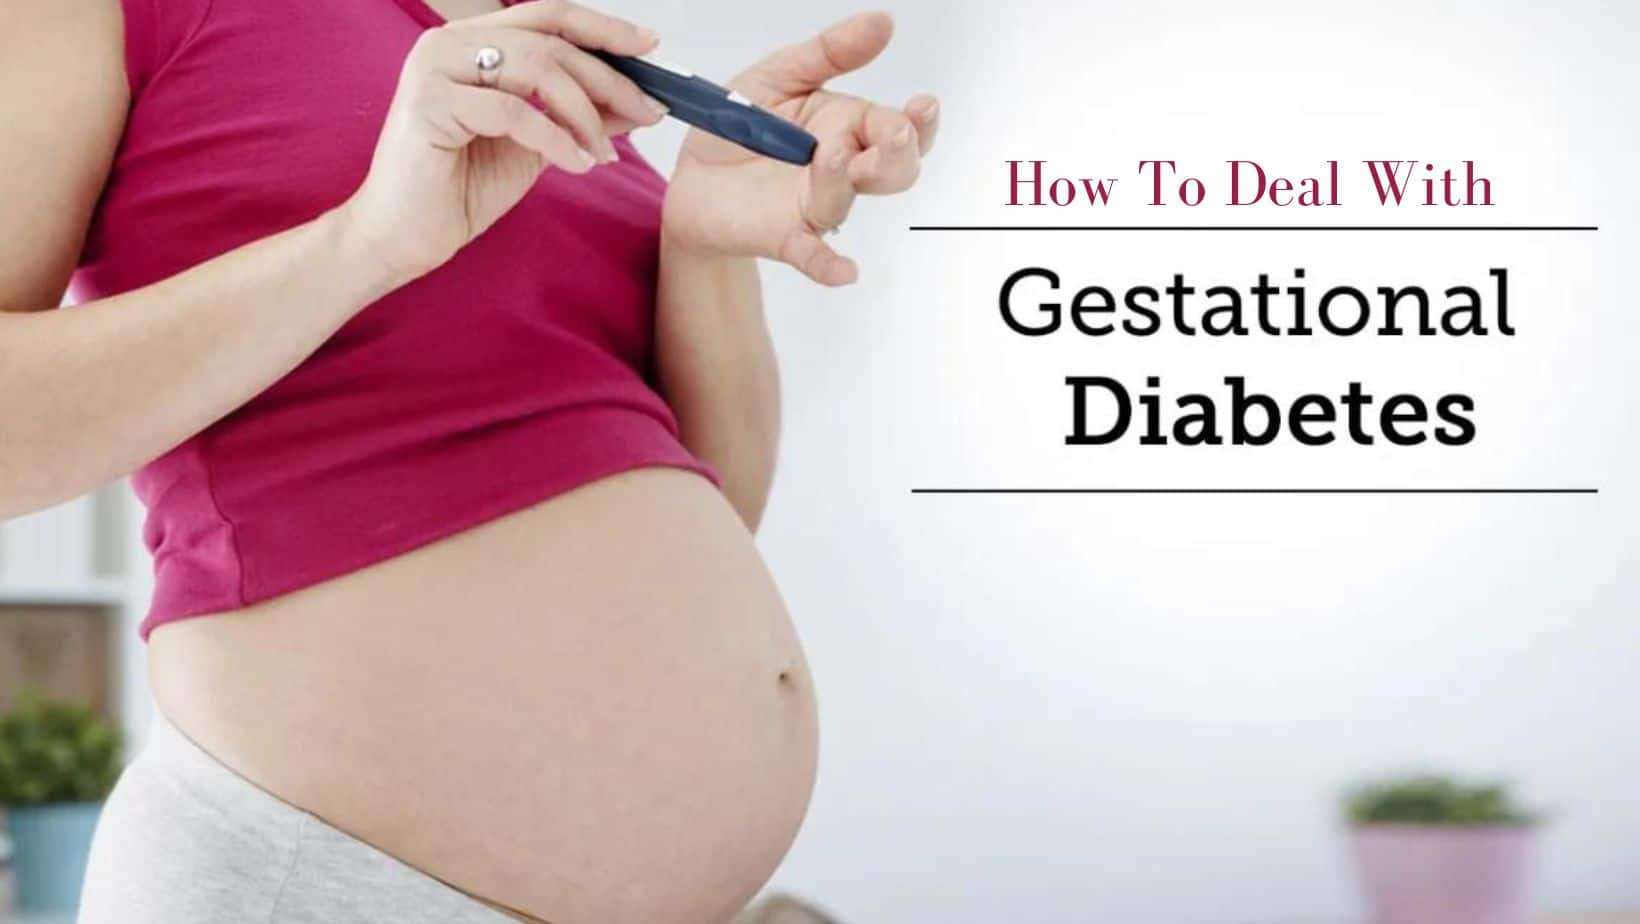 Gestational Diabetes Mellitus 10 Tips to Lower Blood Sugar Naturally During Pregnancy TheHealthSite photo photo